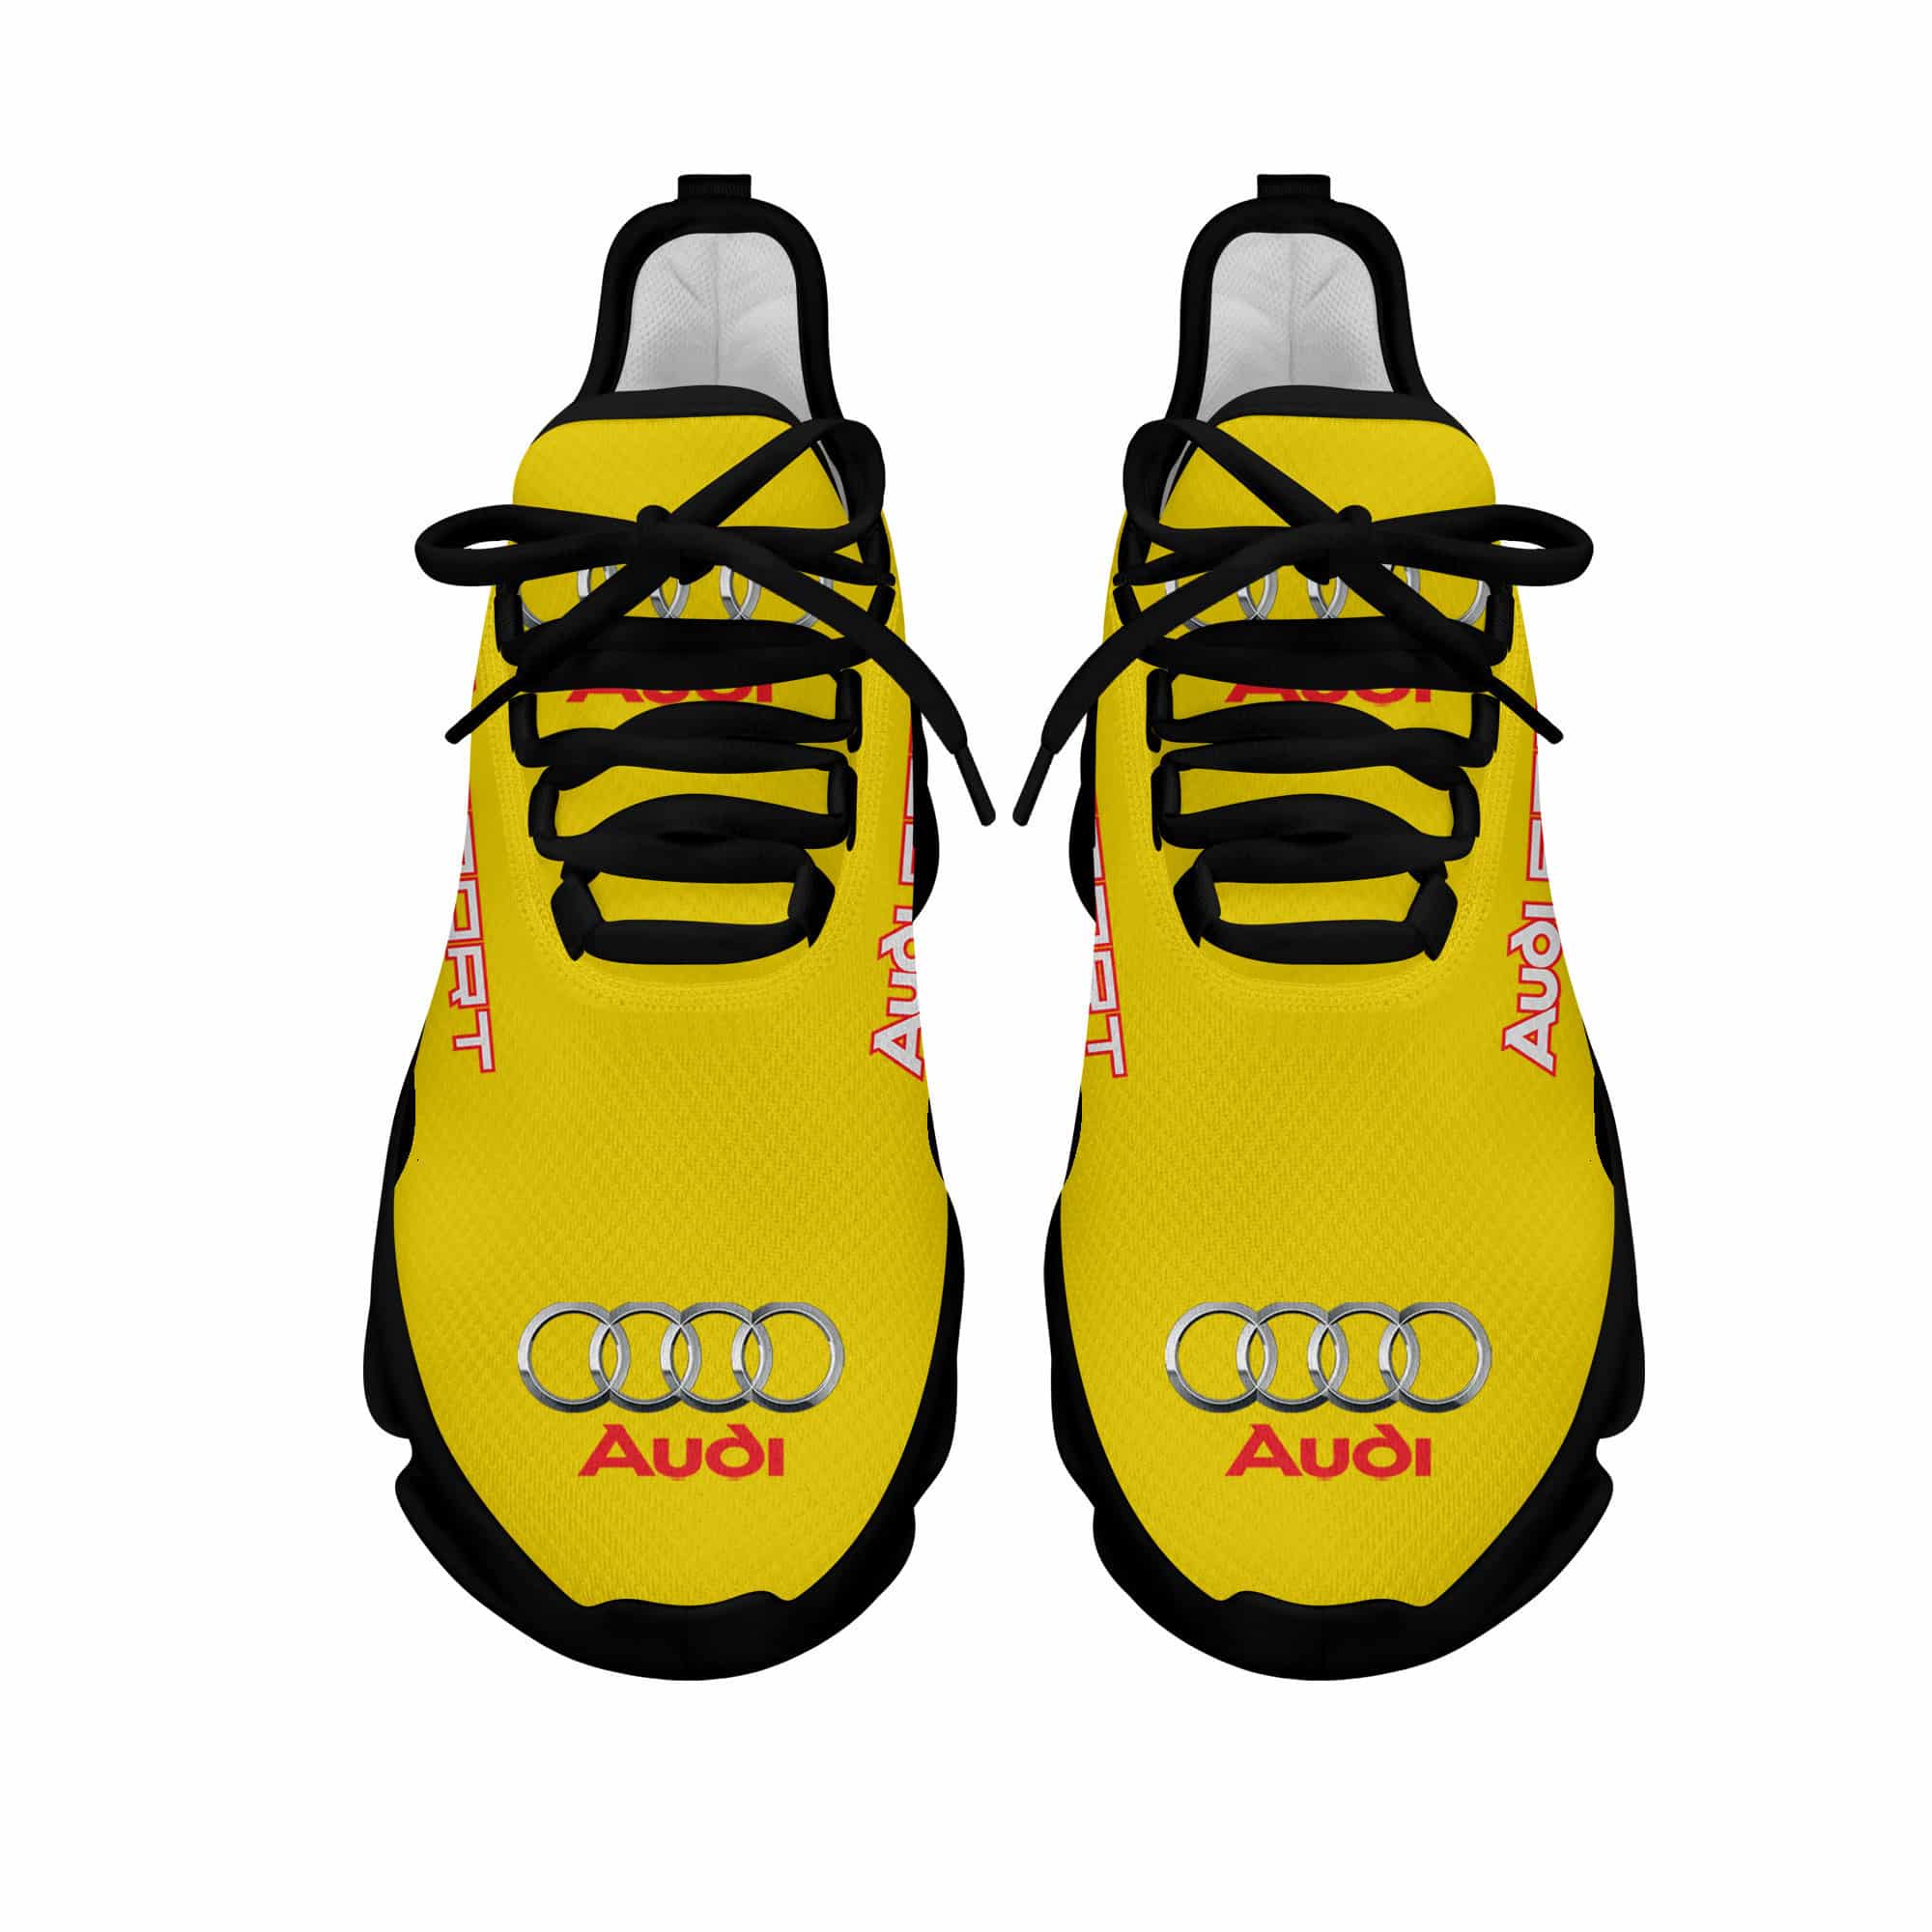 Audi Sport Running Shoes Max Soul Shoes Sneakers Ver 1 4